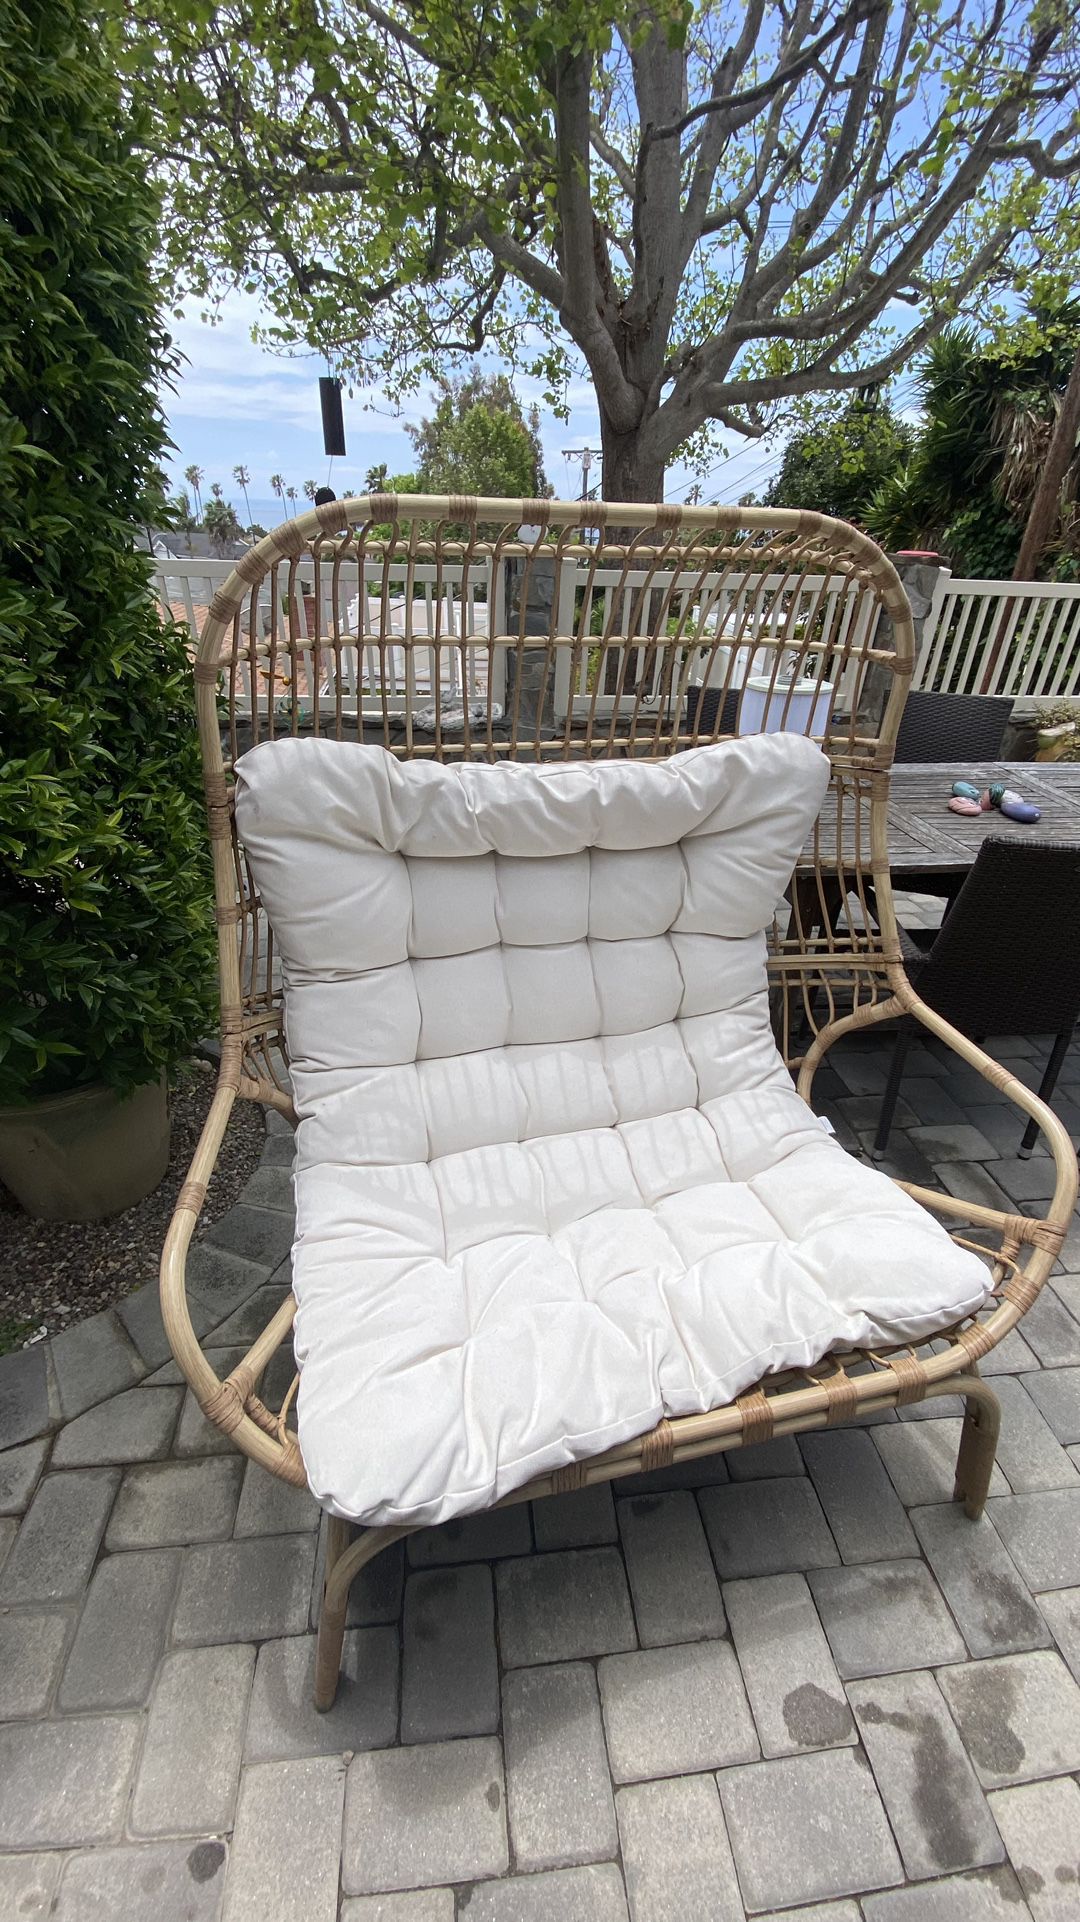 Wicker Chair with Cushion